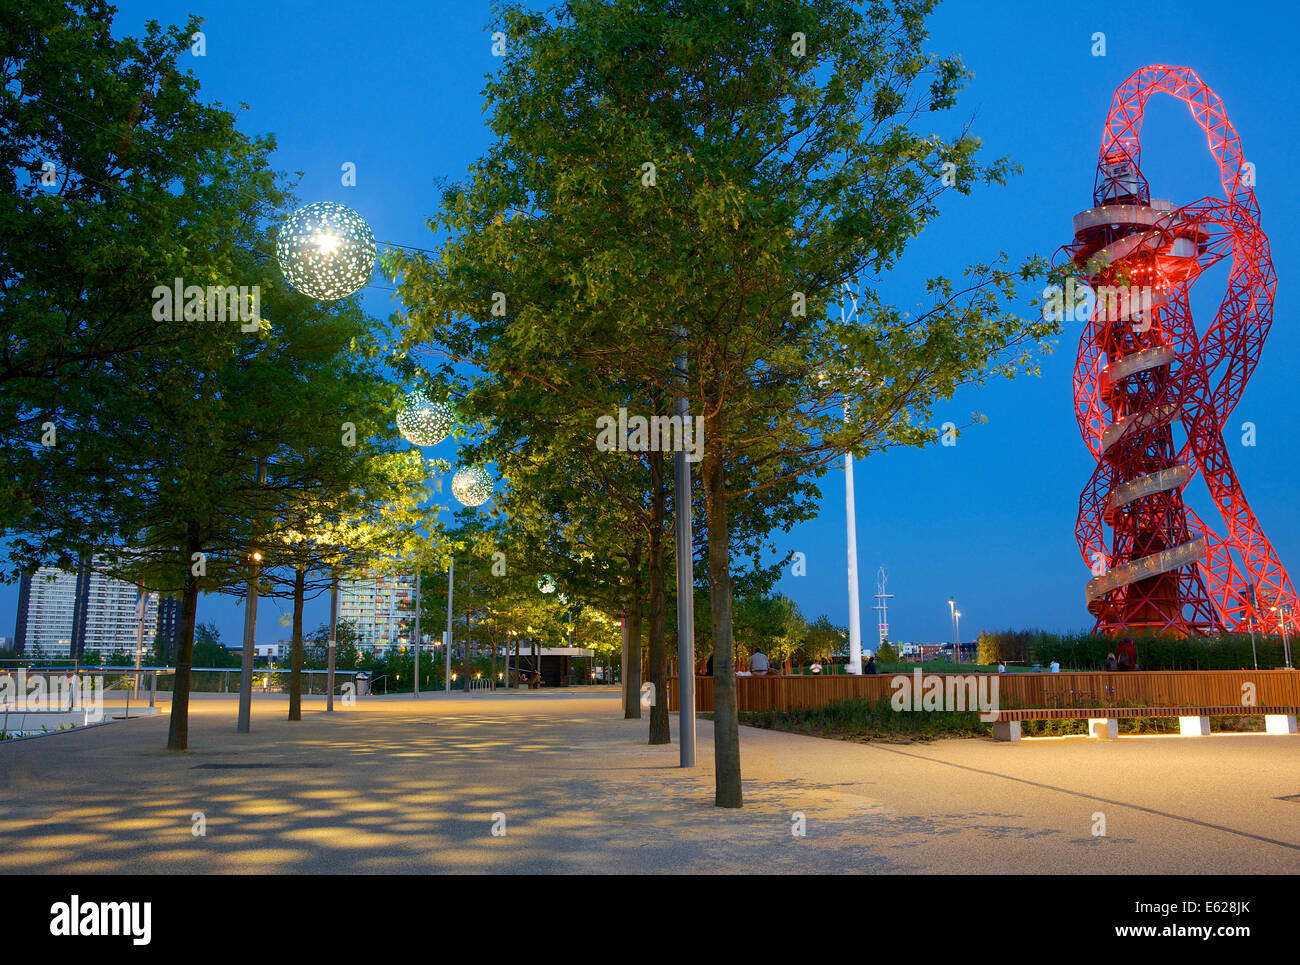 Orbit tower by Arcelor Mittal in the Queen Elizabeth Olympic park in Stratford at night Stock Photo